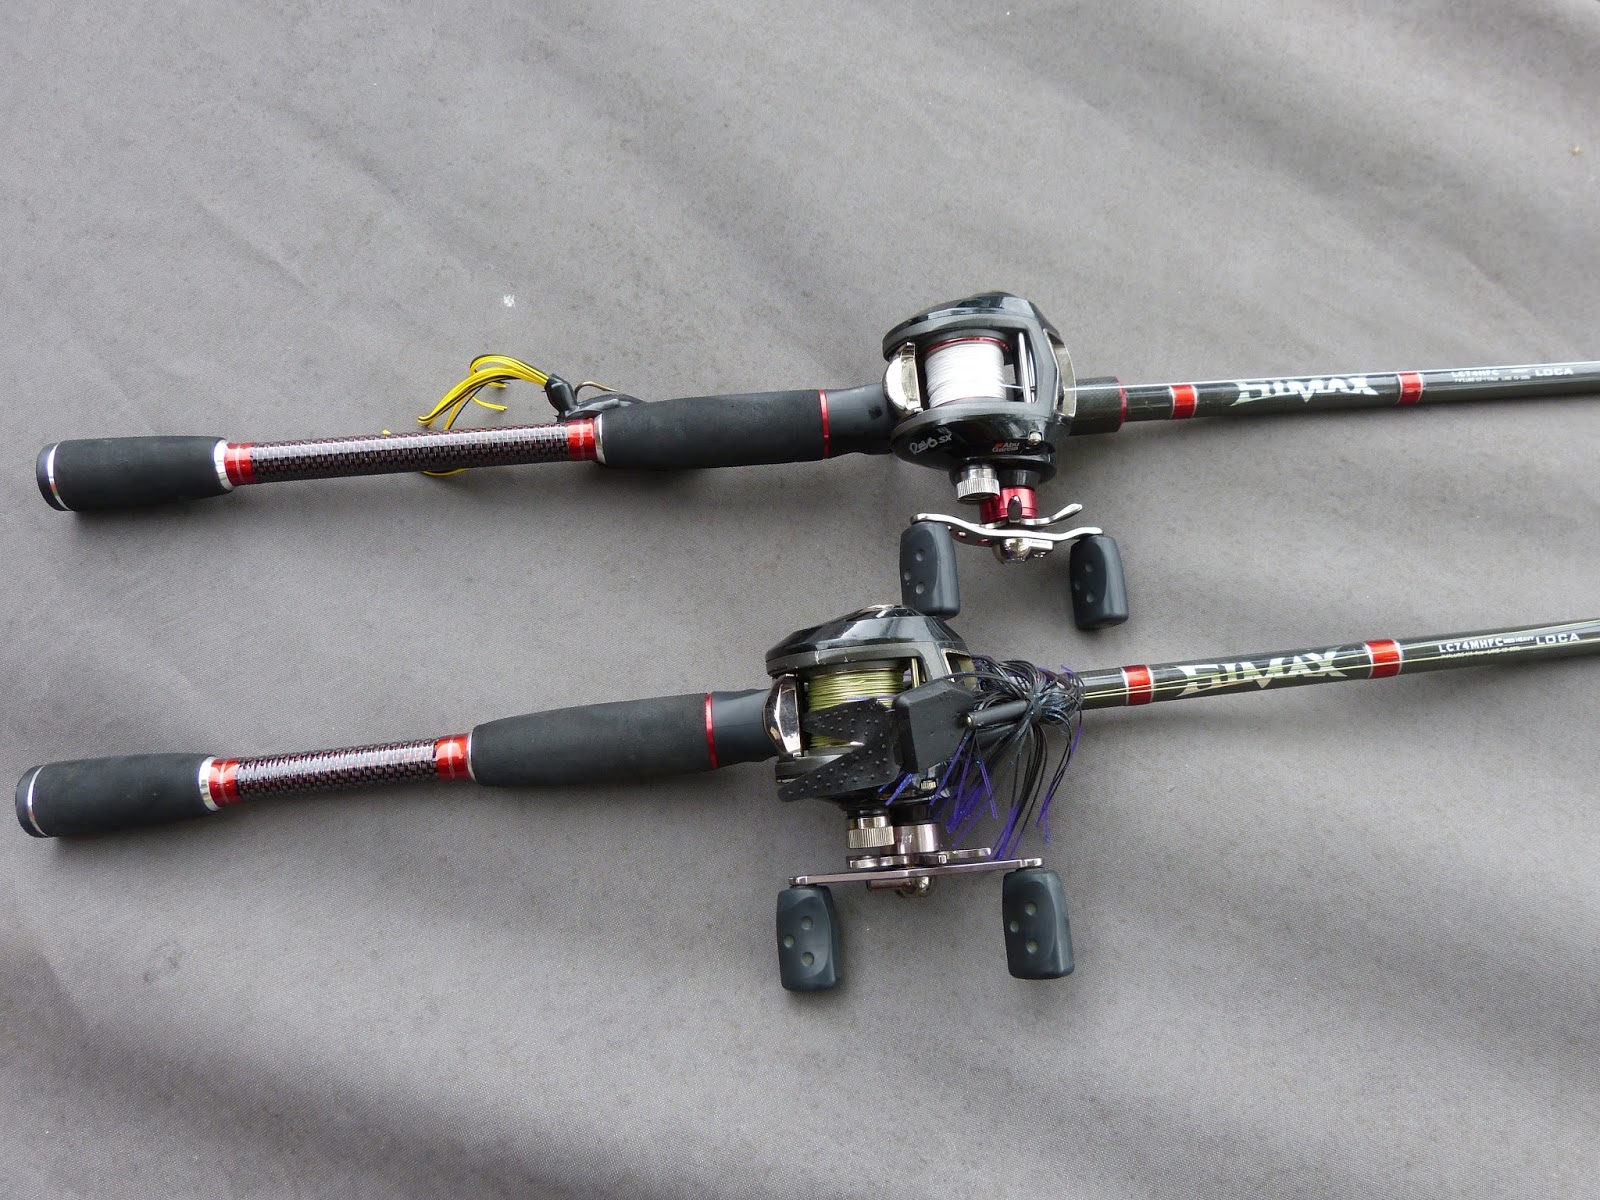 IBASSIN: IBASSIN's Review: The New Redesigned 7'4 Simax Loca Casting Rods